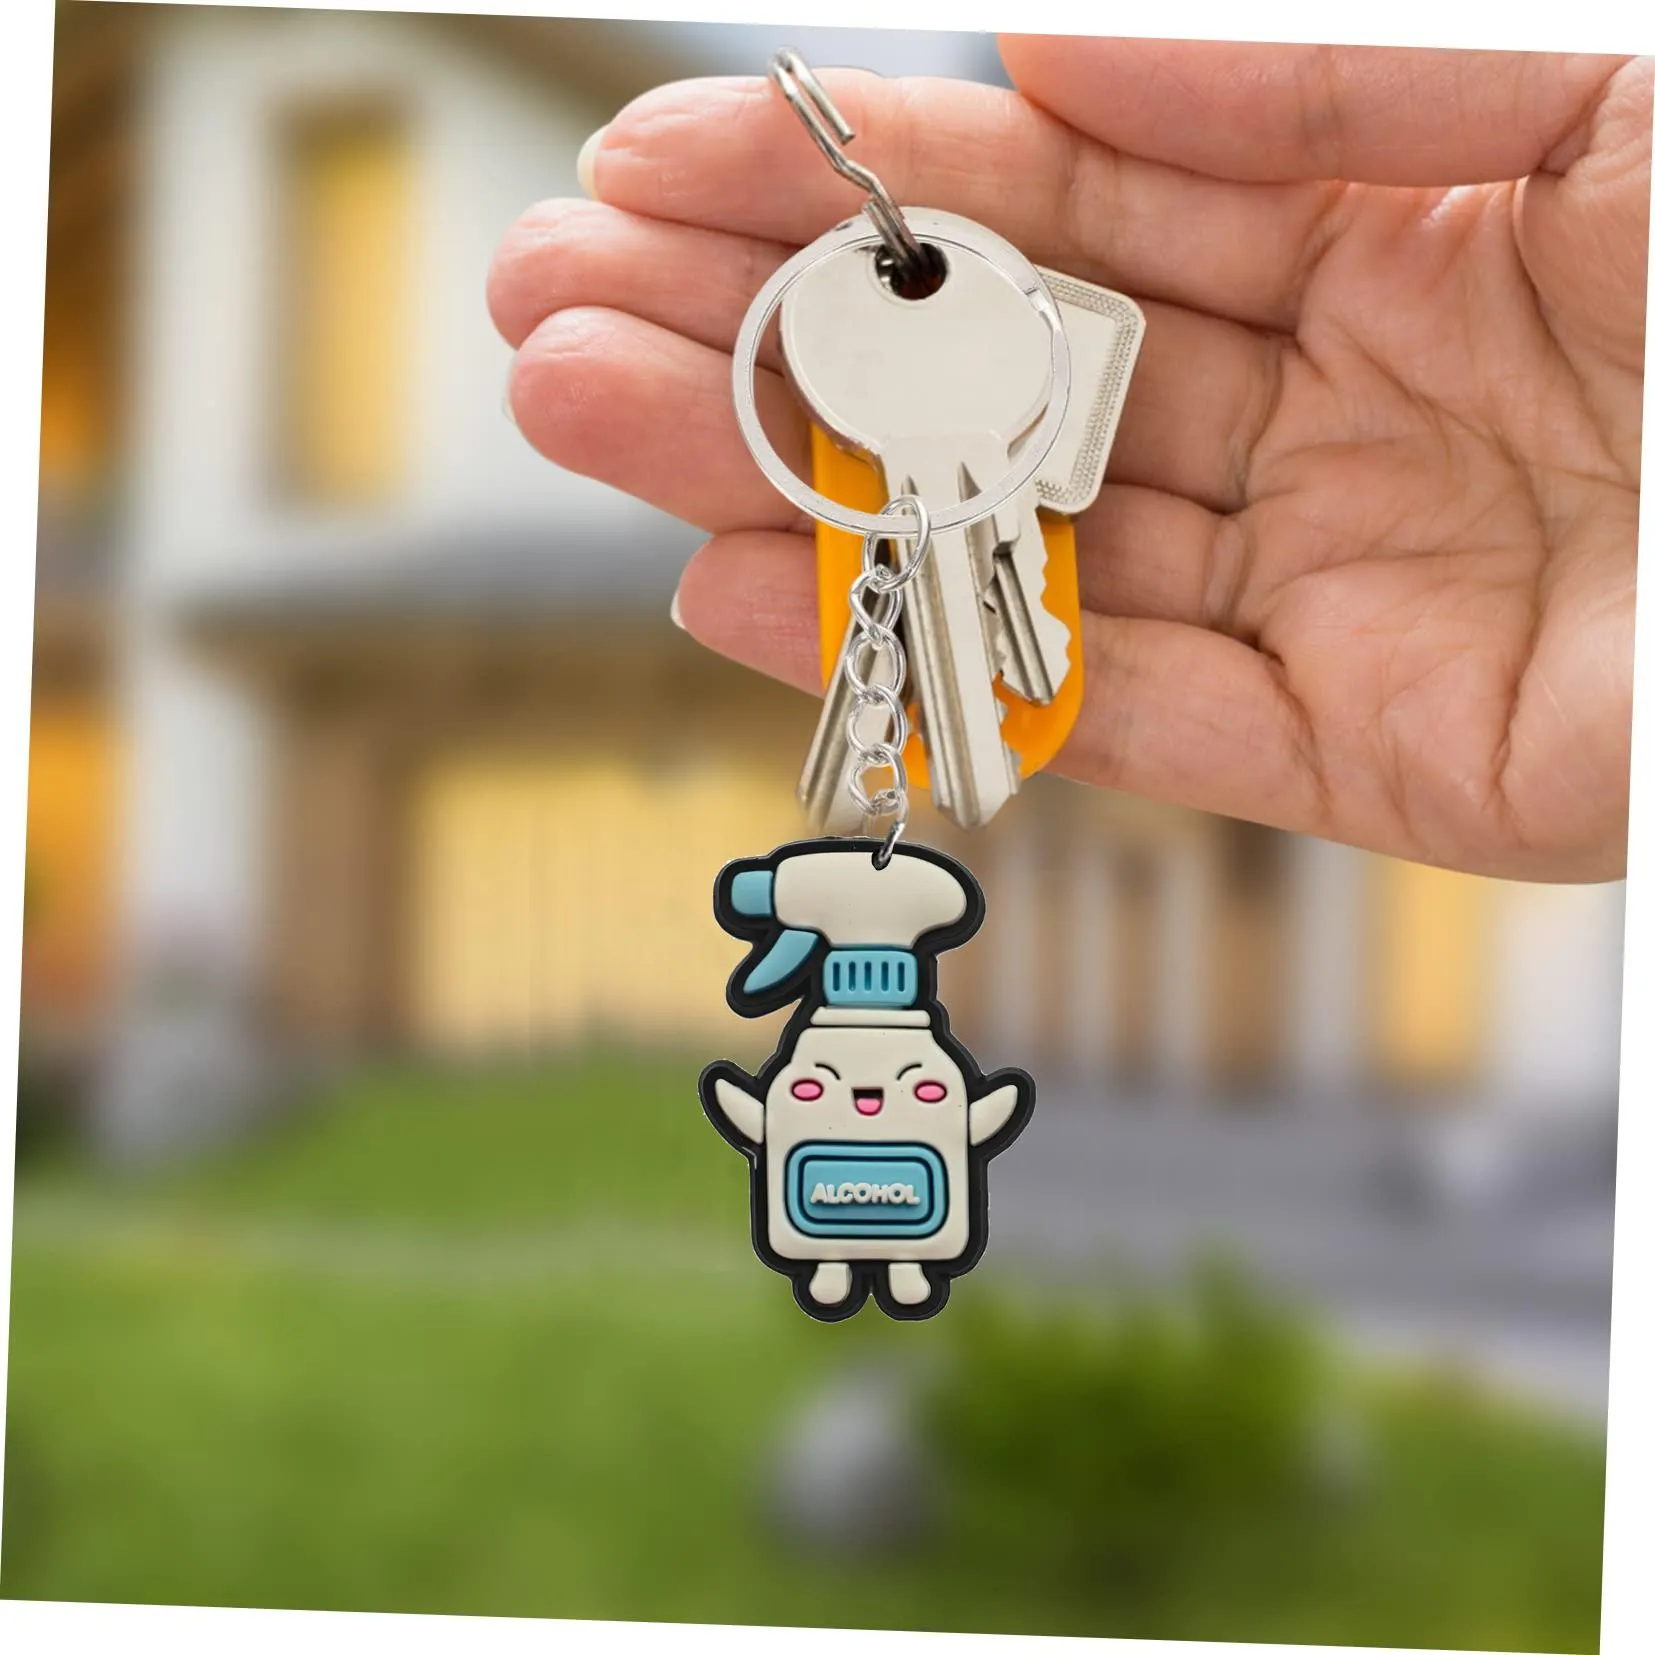 medical 1 keychain key chain accessories for backpack handbag and car gift valentines day anime cool keychains backpacks rings keyring suitable schoolbag ring women party favors school birthday supplies